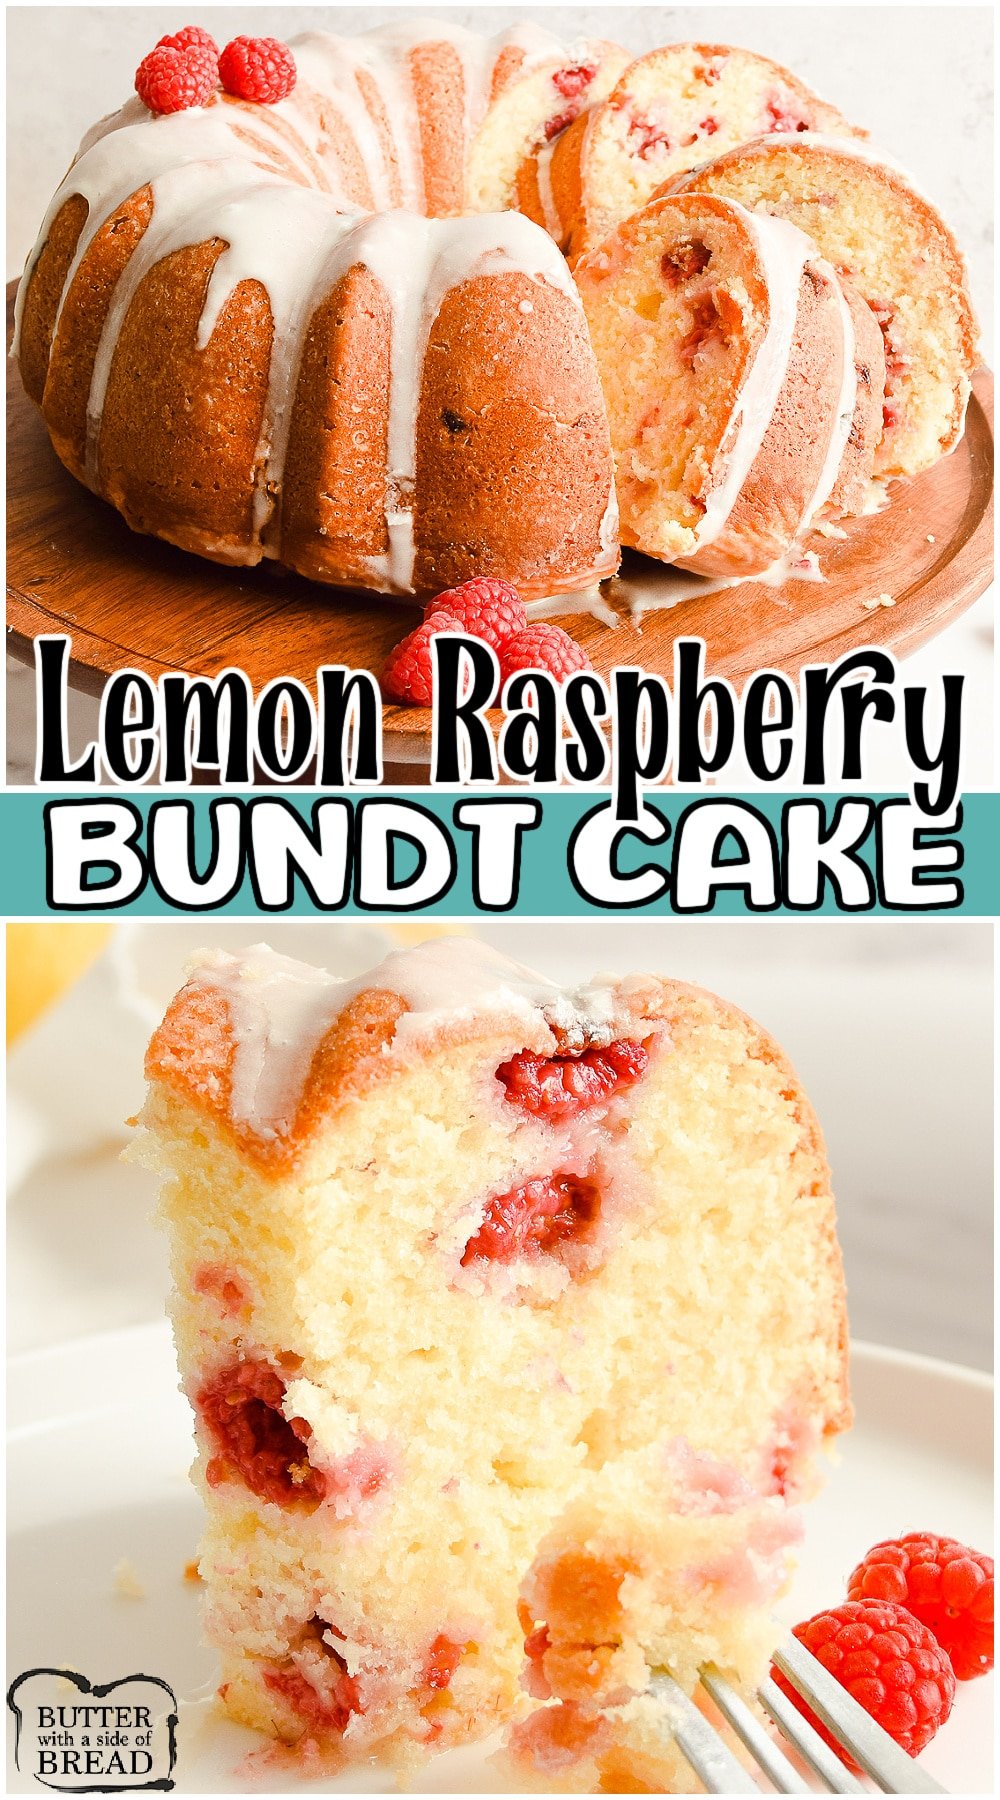 Lemon Raspberry Bundt Cake made from scratch & packed with fresh berries and tart lemon flavor in every bite! Delightful homemade bundt cake recipe perfect for Spring!